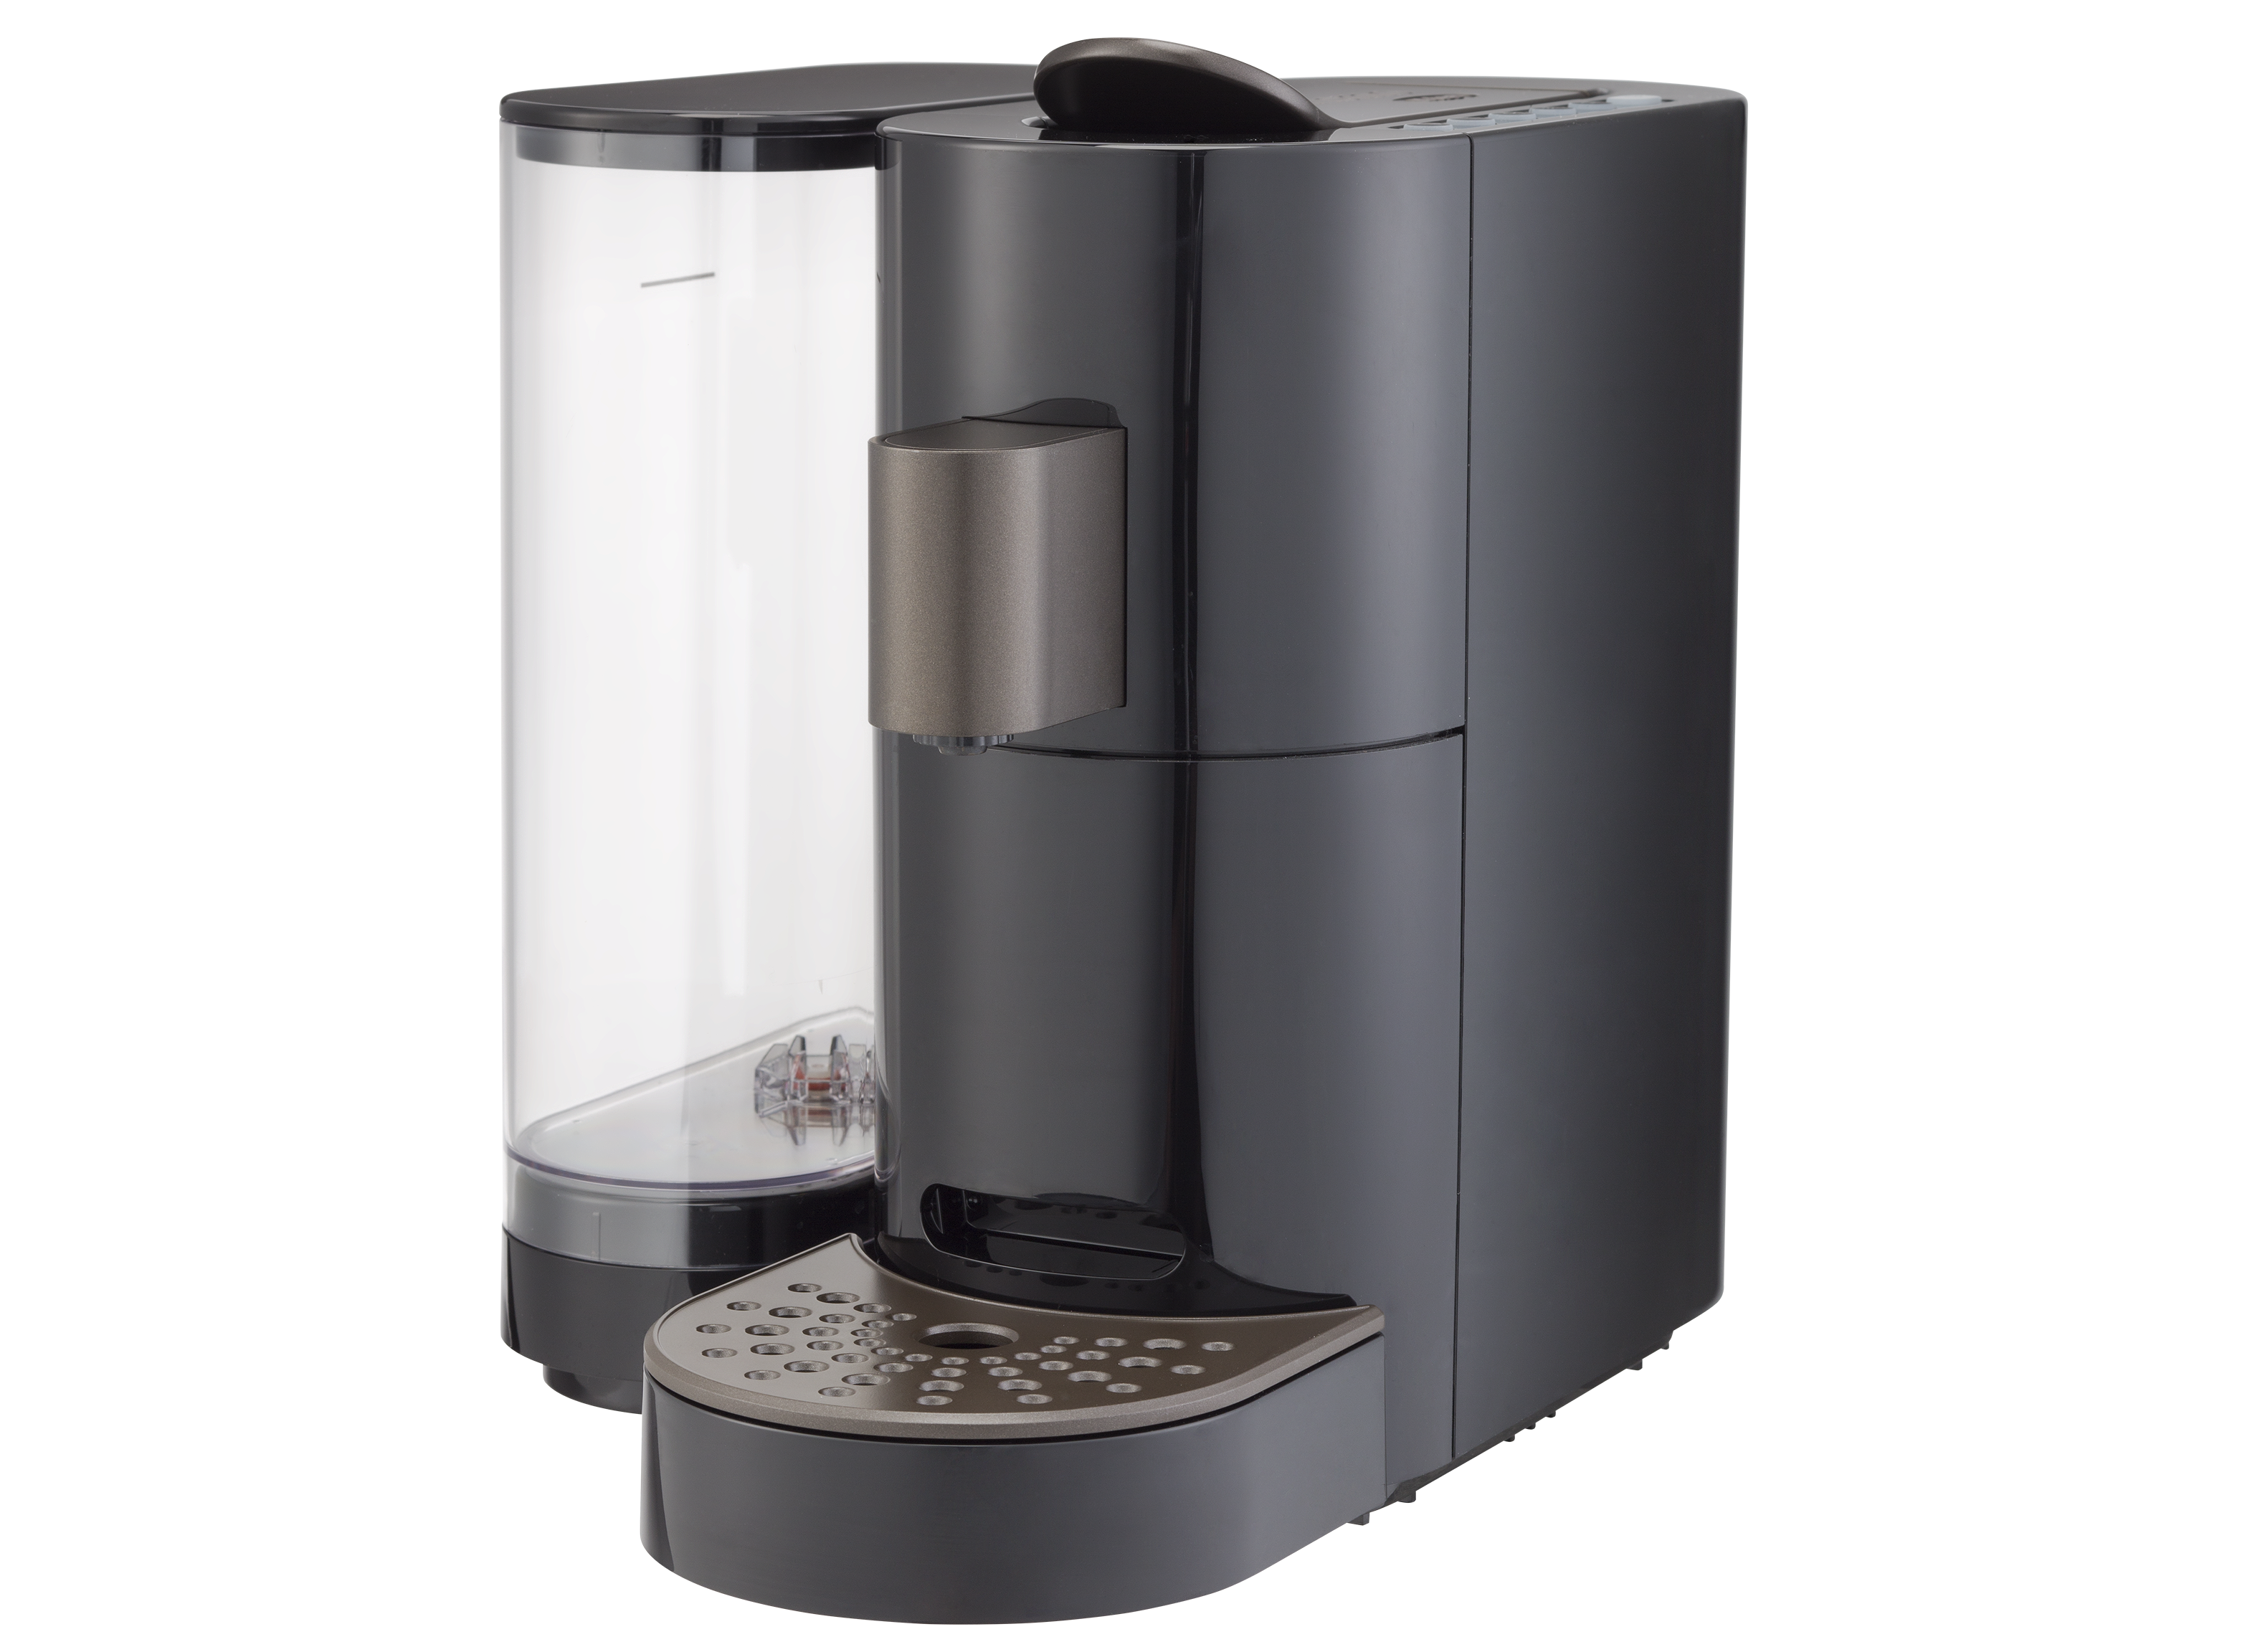 https://crdms.images.consumerreports.org/prod/products/cr/models/388206-singleservecoffeemakers-verismo-vbrewer.png